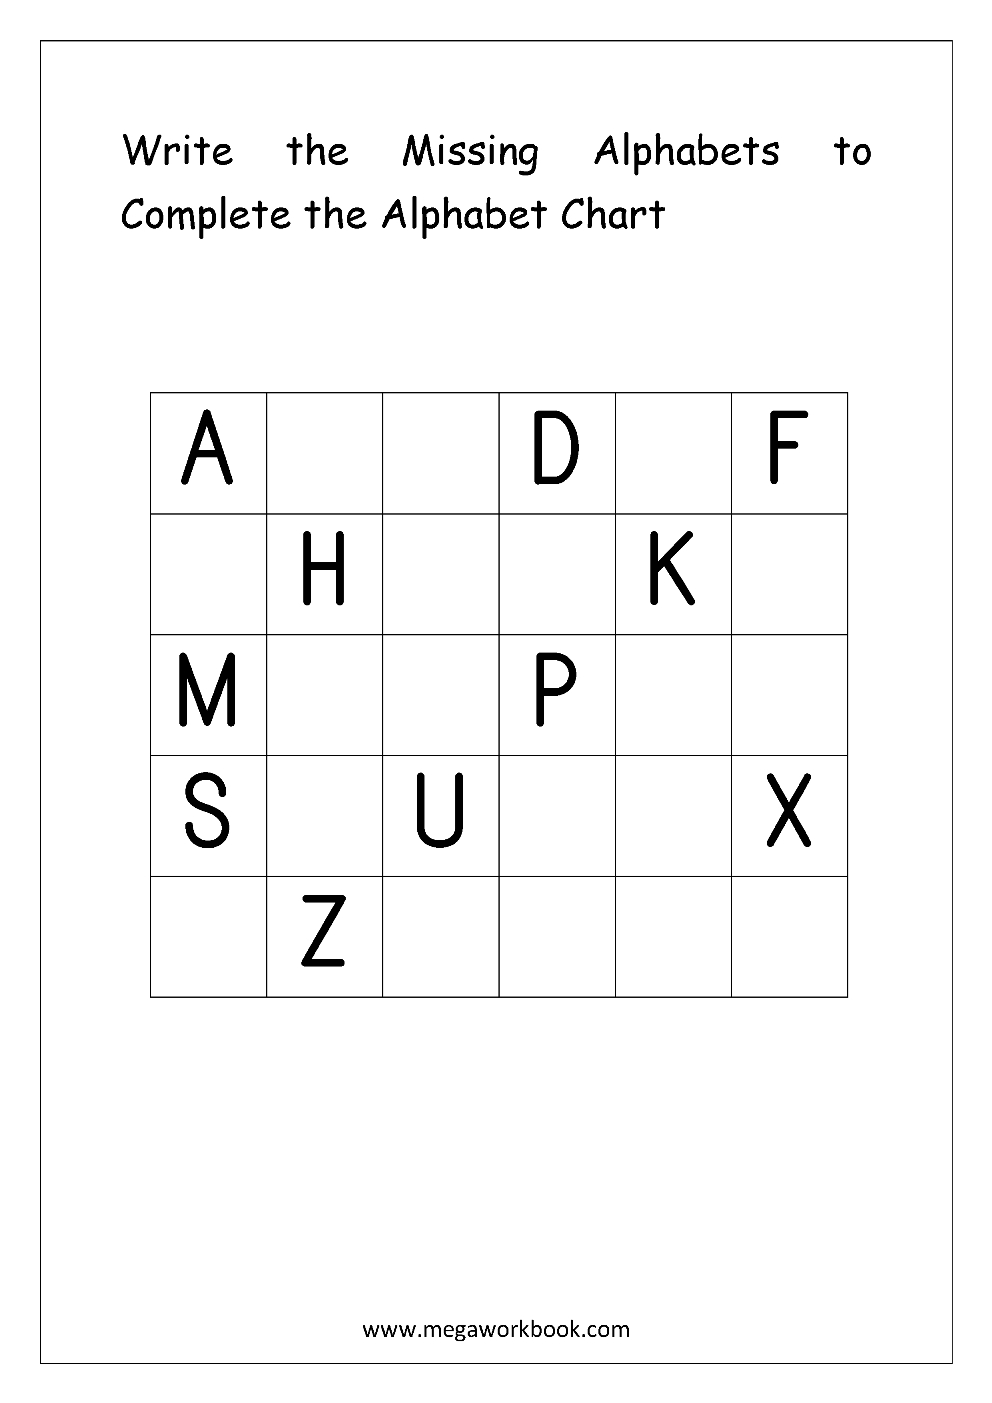 Free English Worksheets - Alphabetical Sequence pertaining to Alphabet Order Worksheets Printable